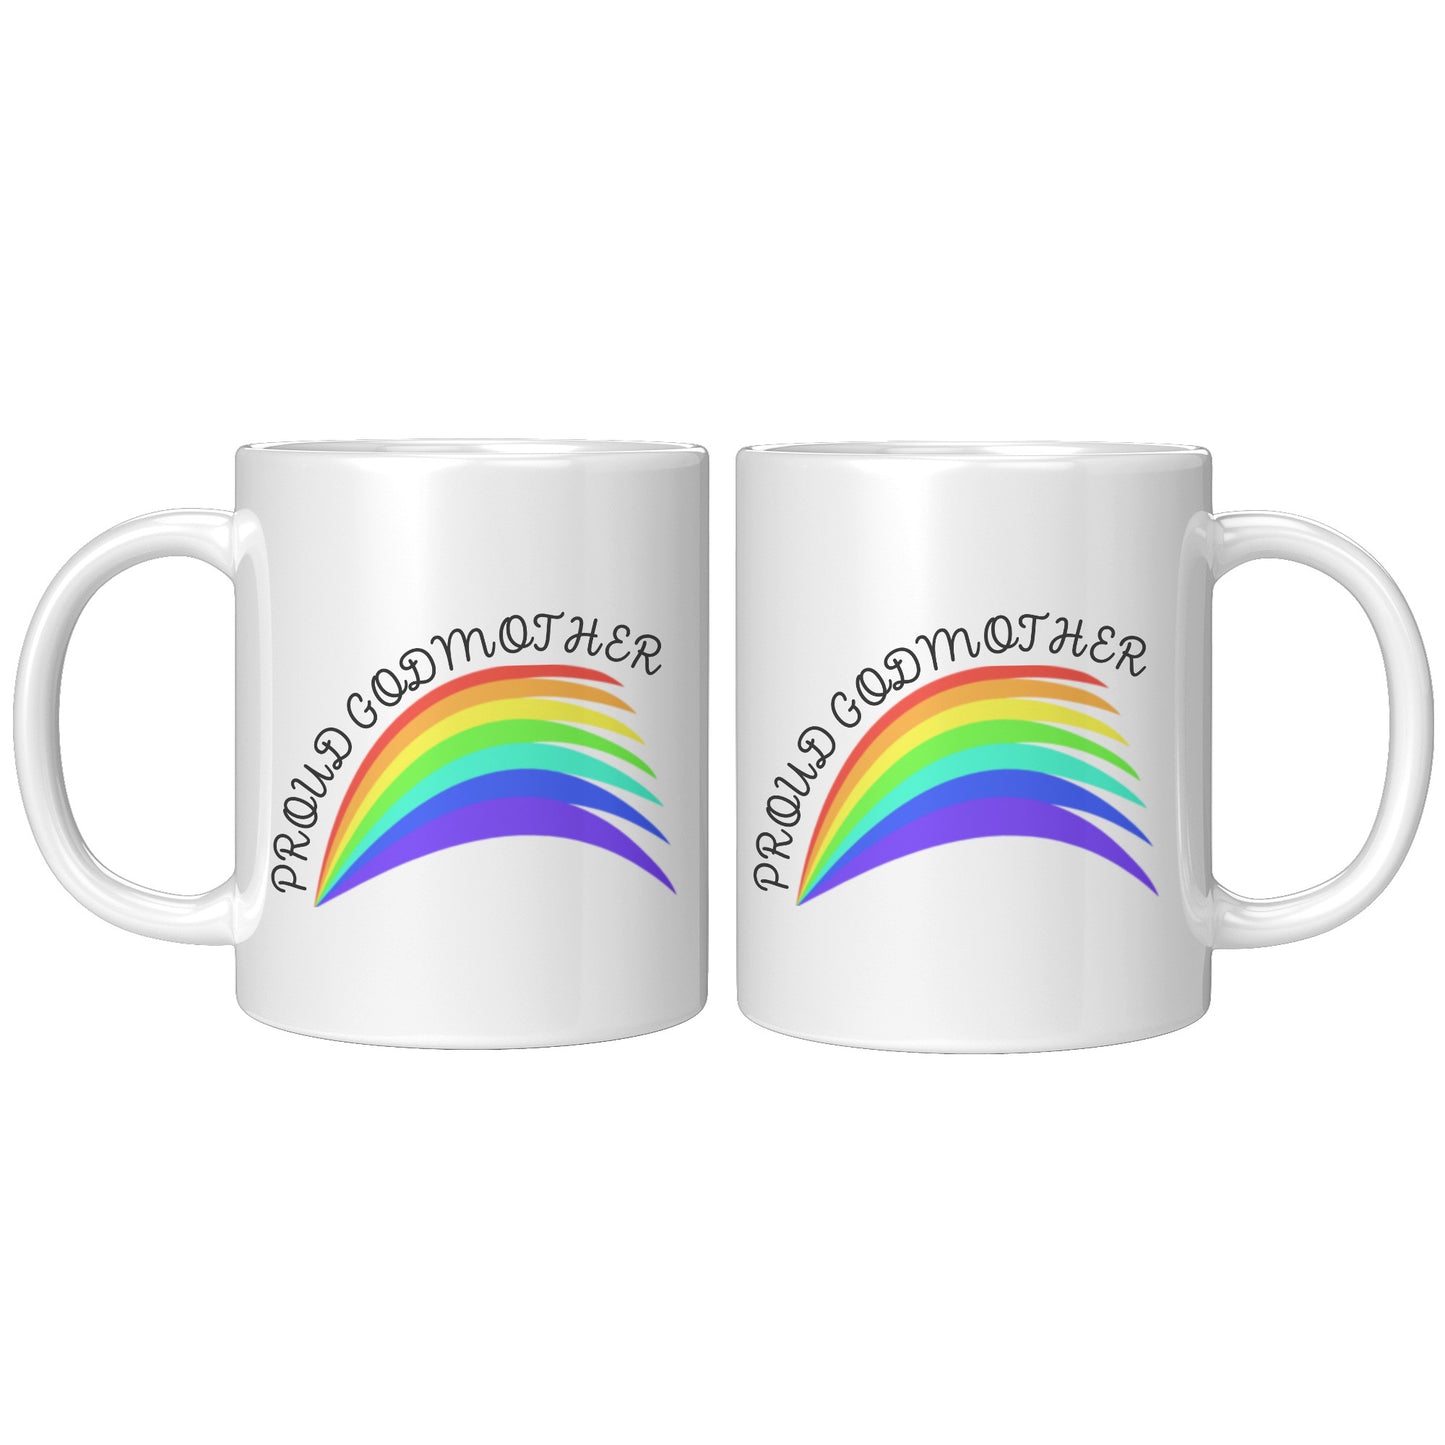 LGBTQ+ Pride Rainbow Mug For Godmother To Support Your Loved Ones, White With Colourful Design